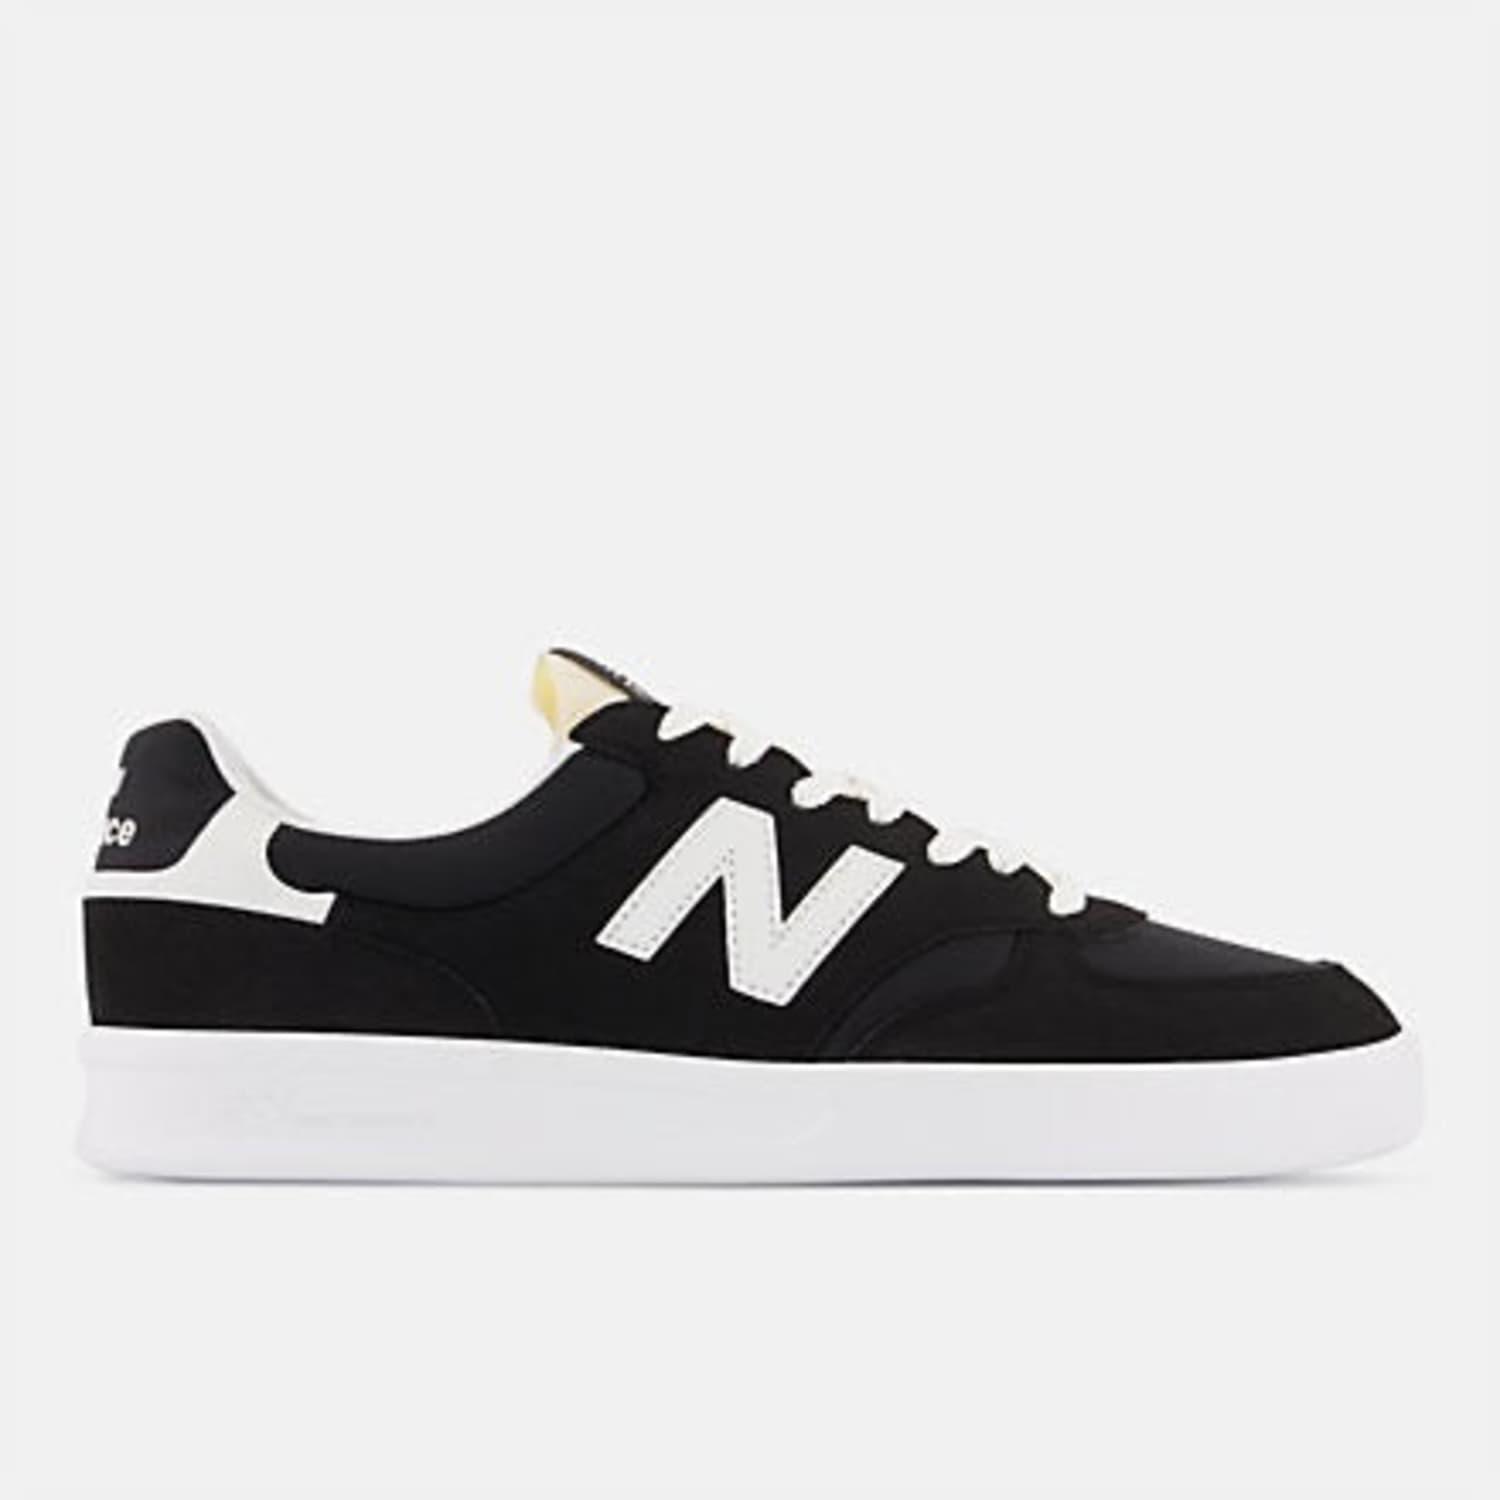 New Balance Suede 300 Court Trainers in Black for Men - Lyst